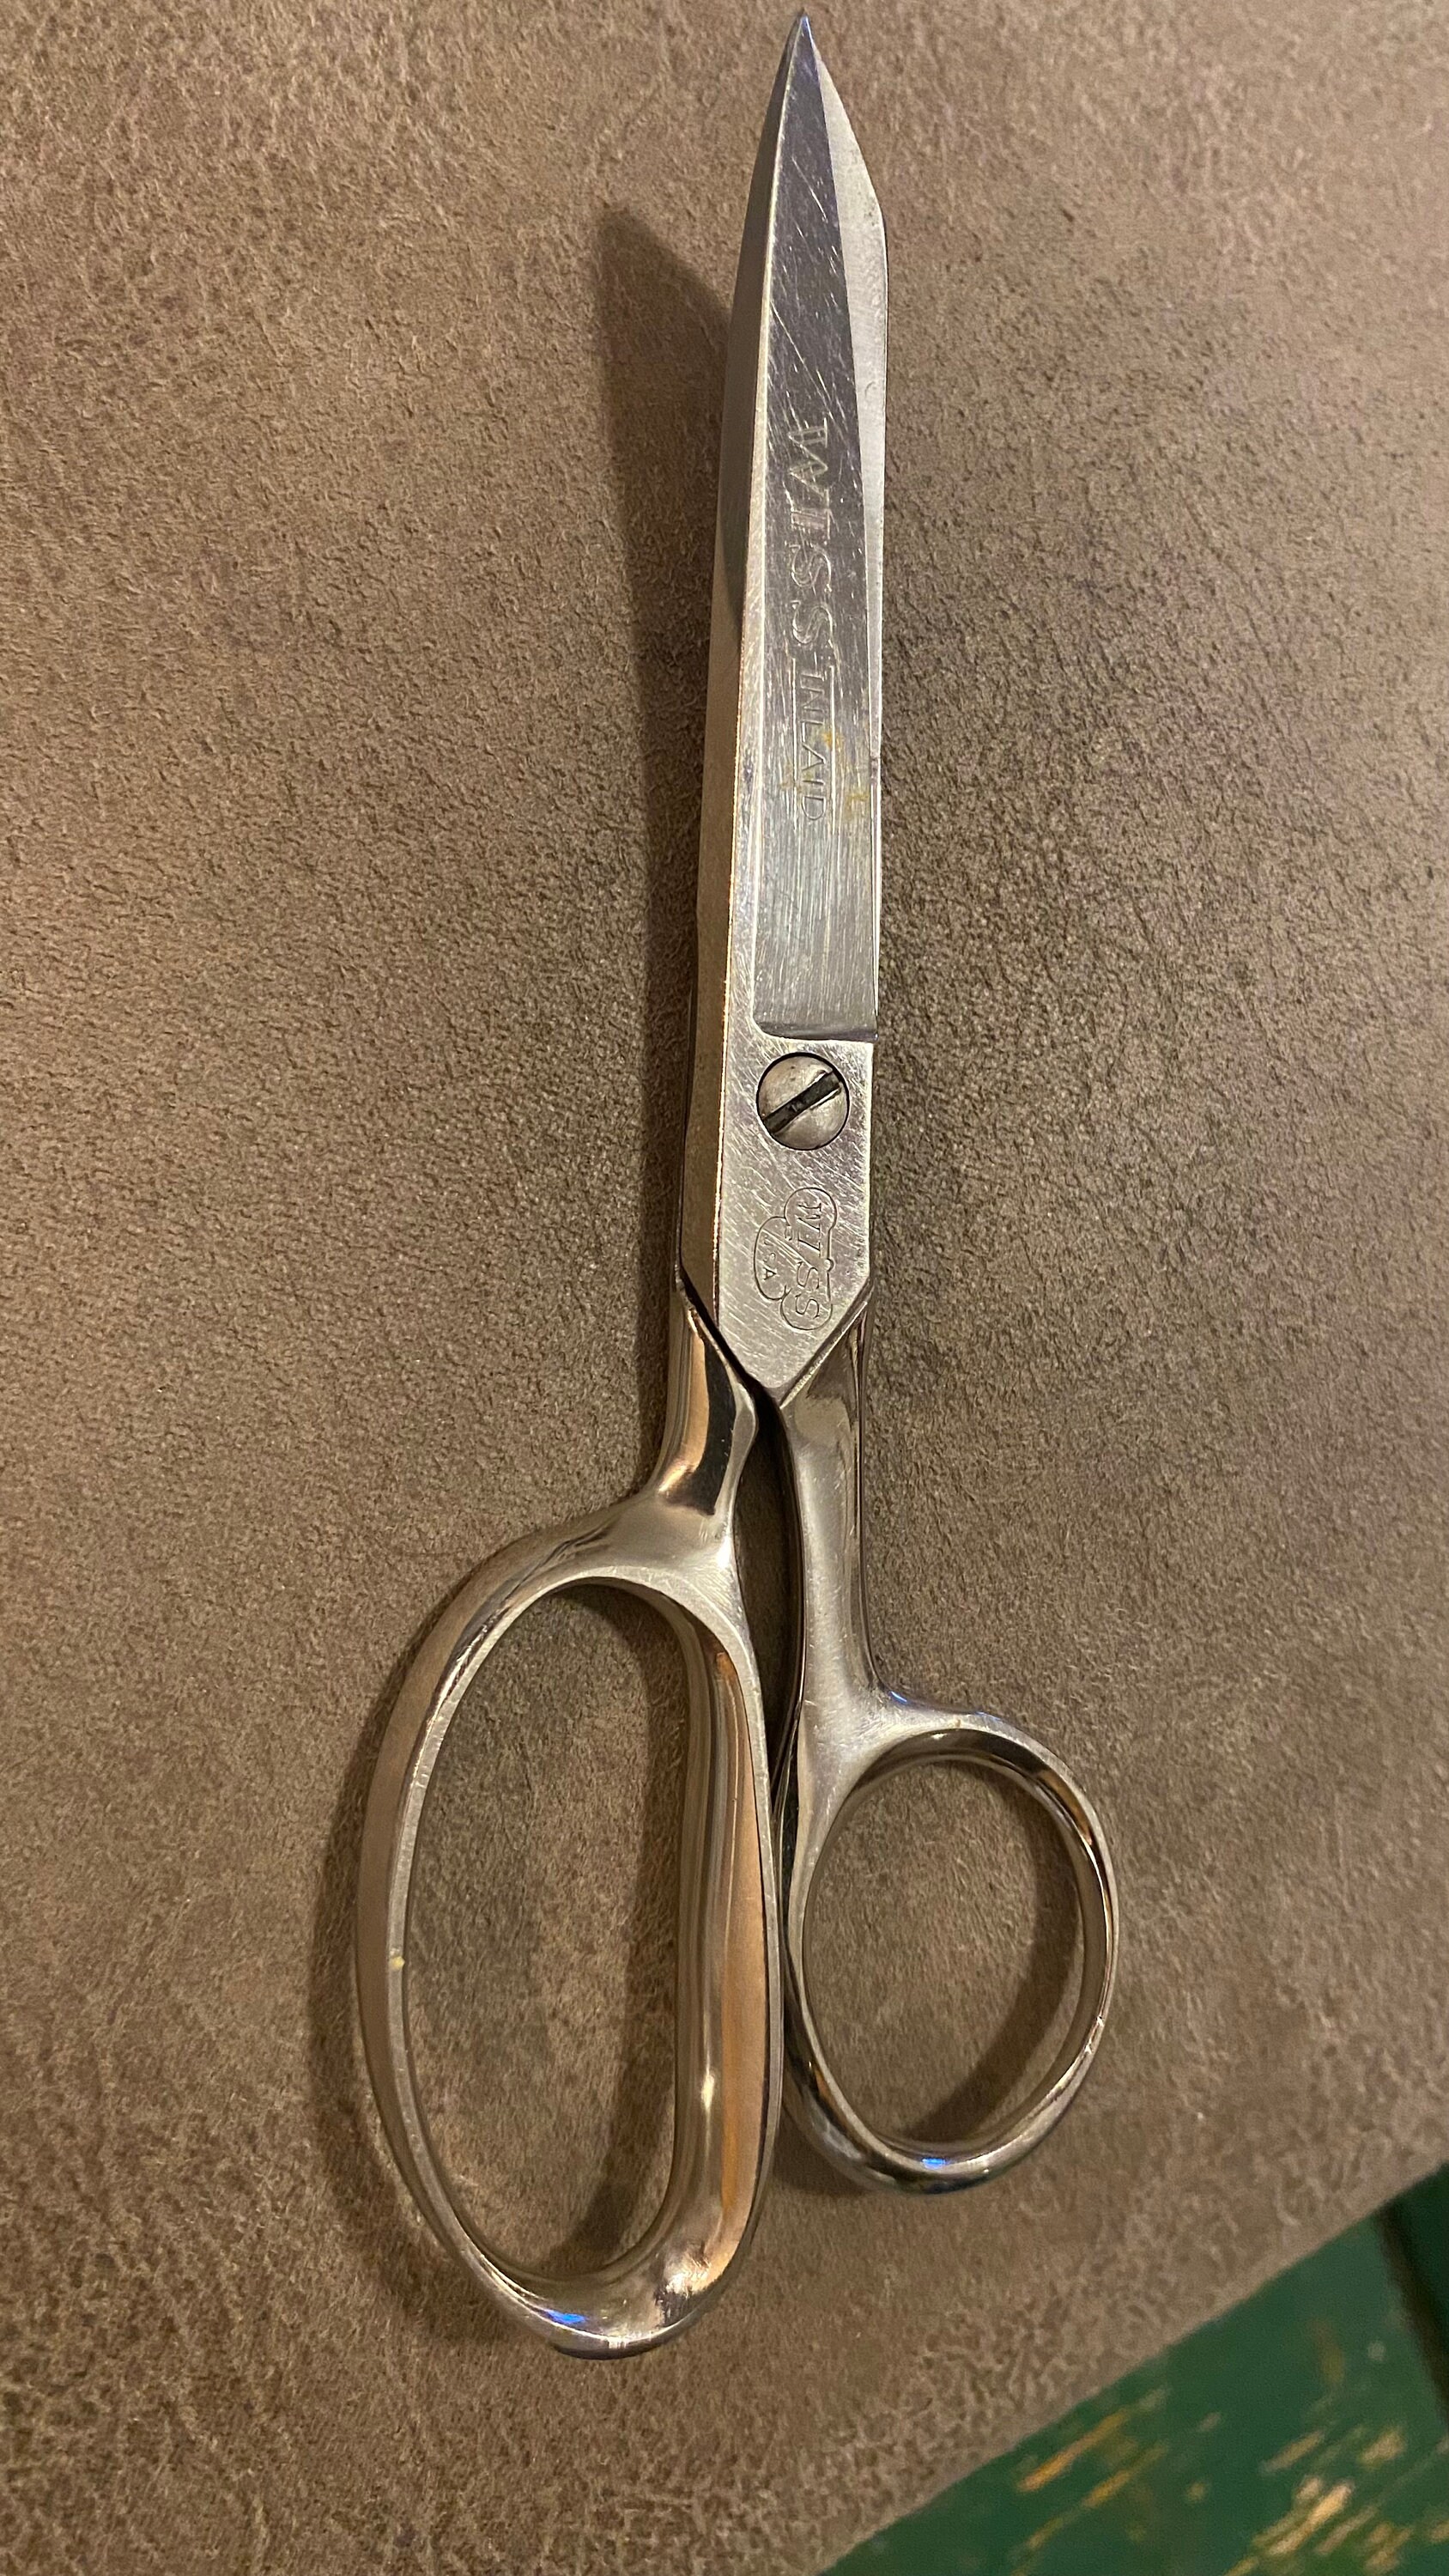 Vintage Wiss Sewing Crafting Scissors Model 156 Made in USA 6”